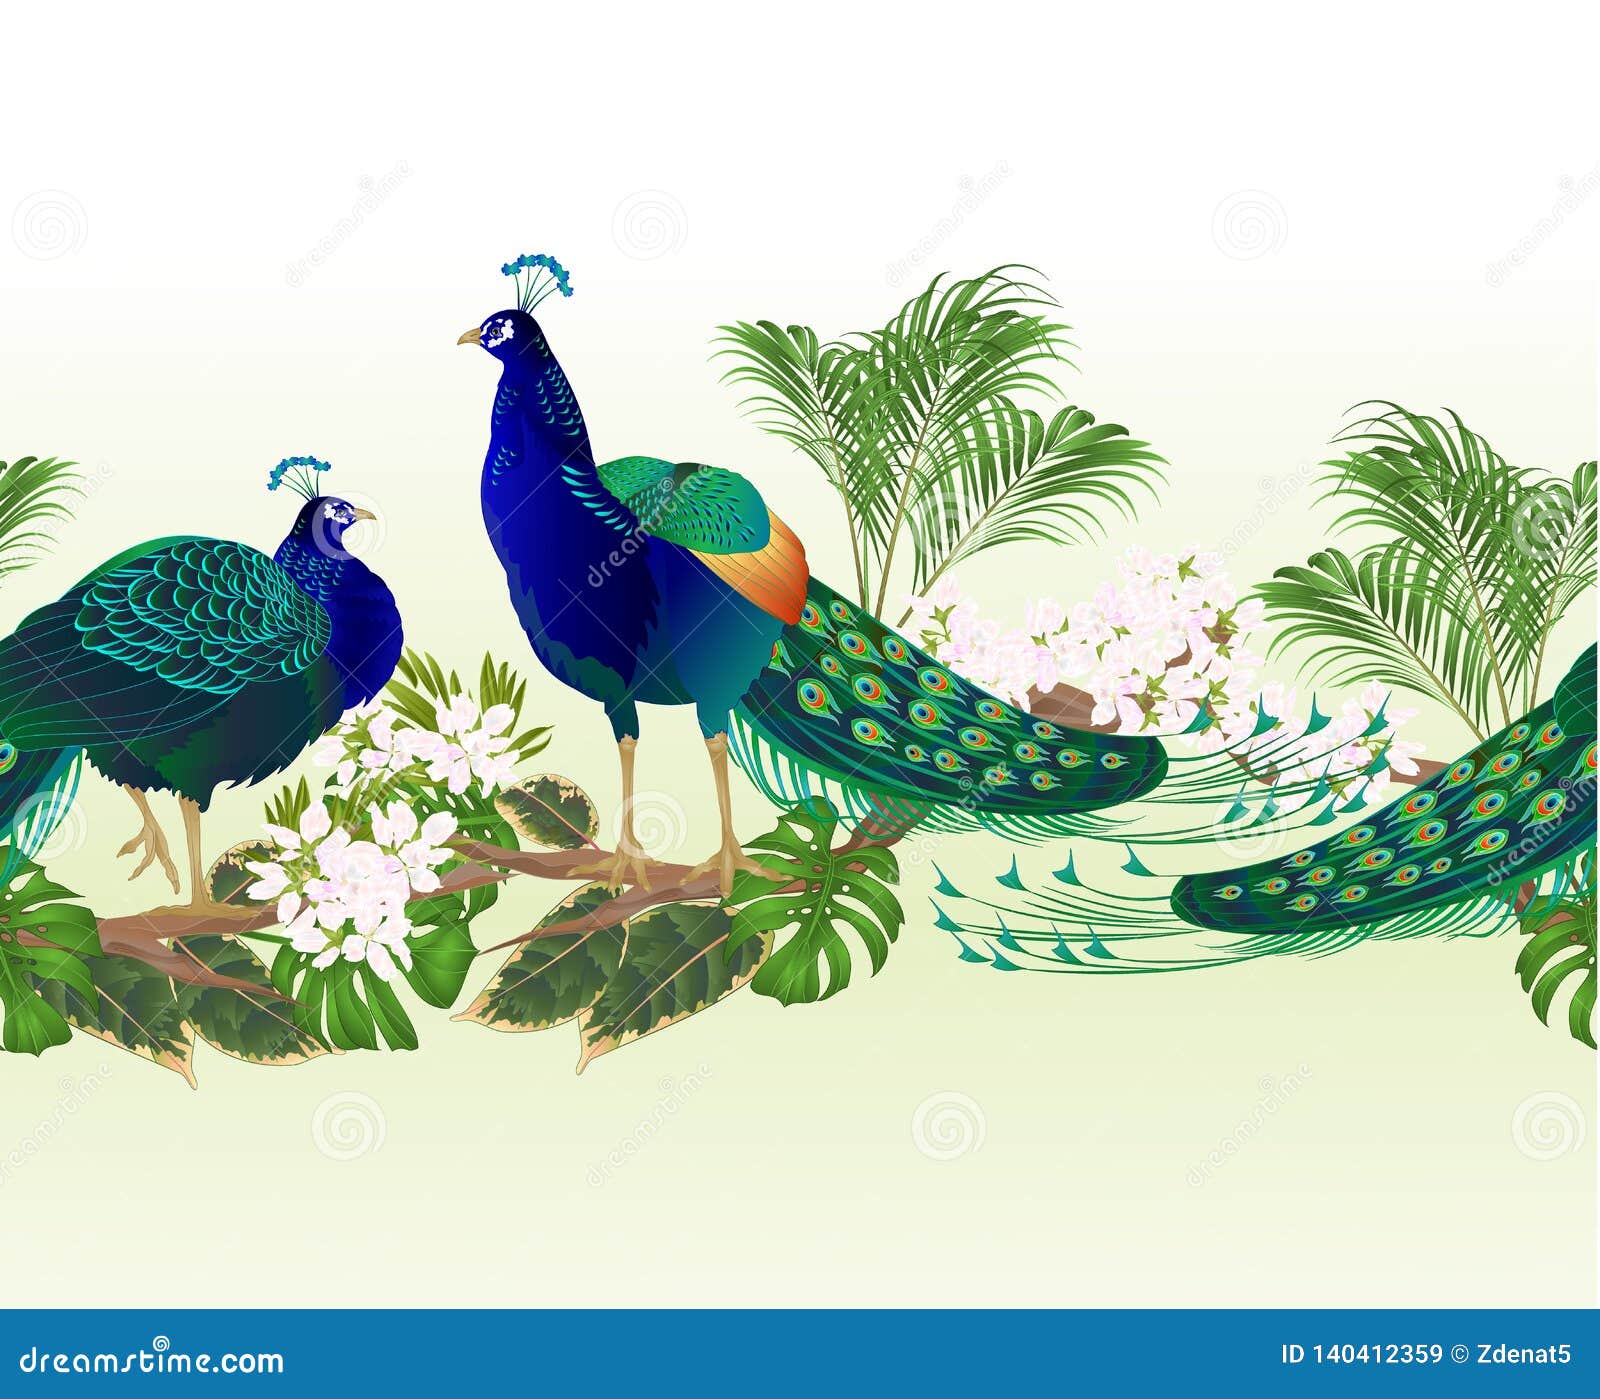 Border Seamless Background Peacocks Beauty Exotic Birds And Tropical Flowers Watercolor Vintage